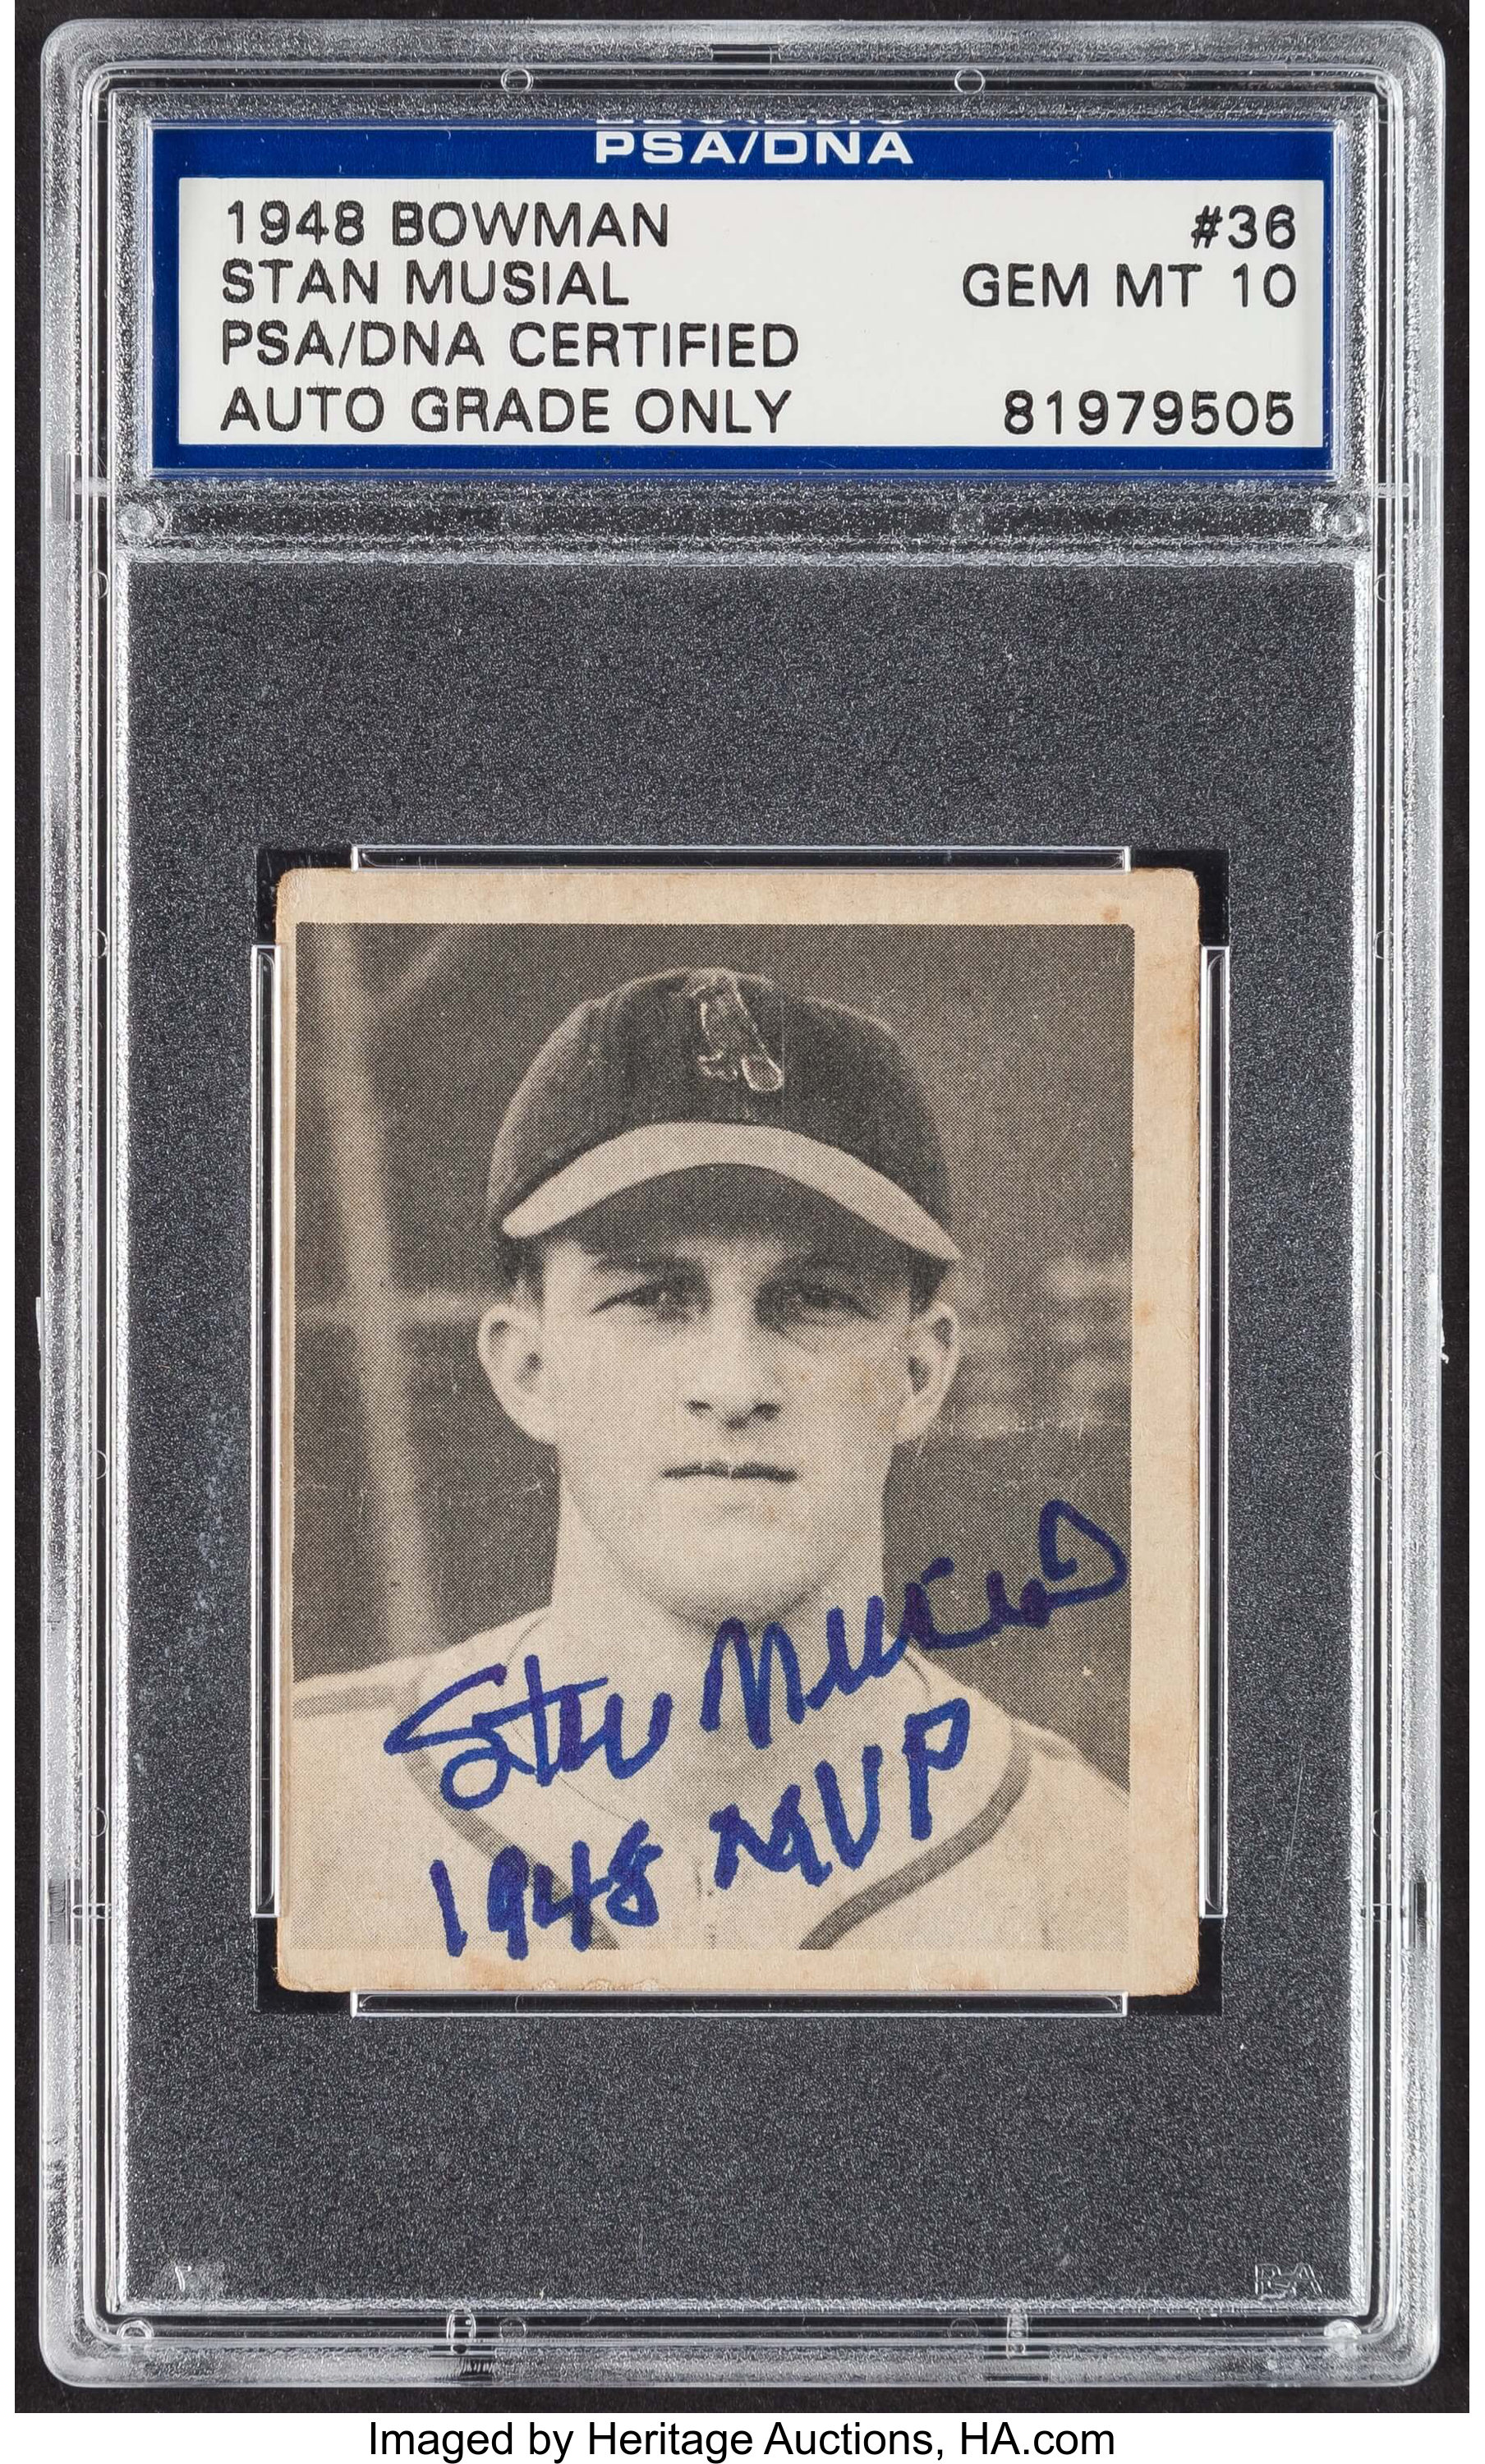 stan musial 1948